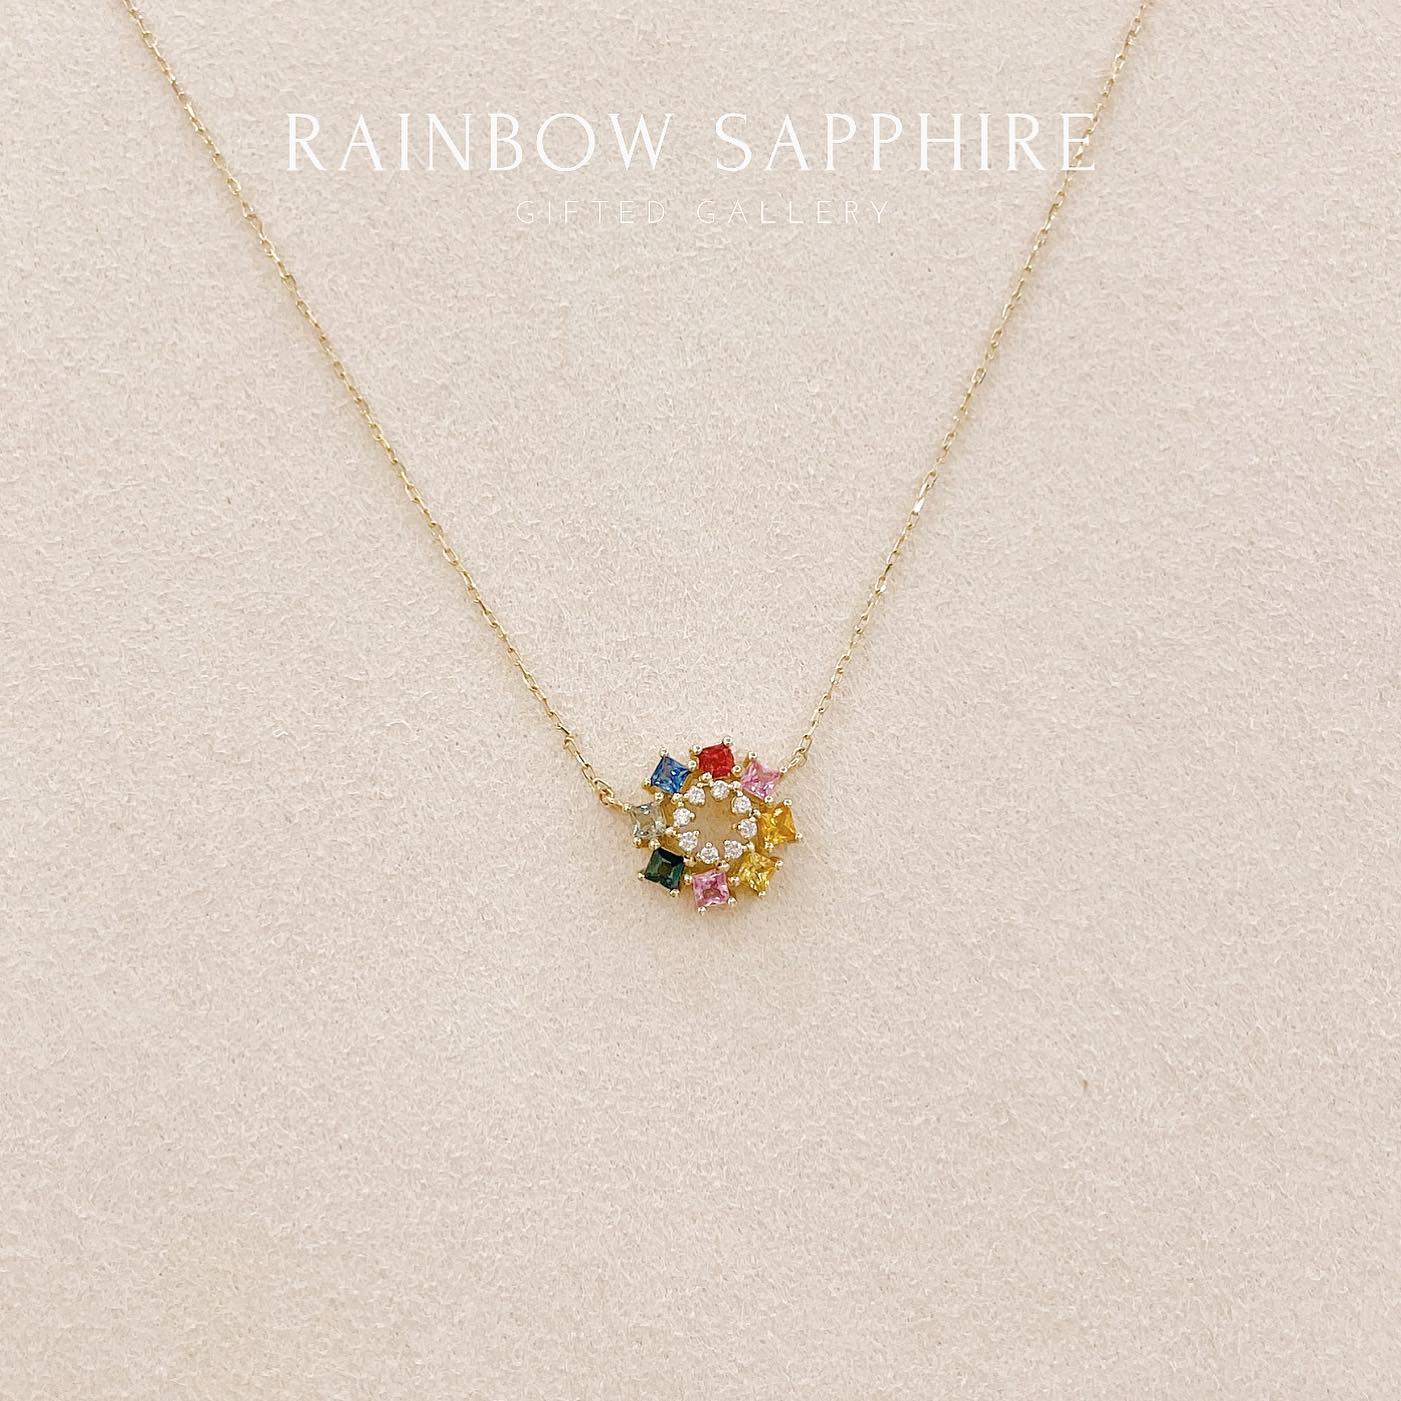 Rainbow Sapphire Necklace by Gifted Gallery